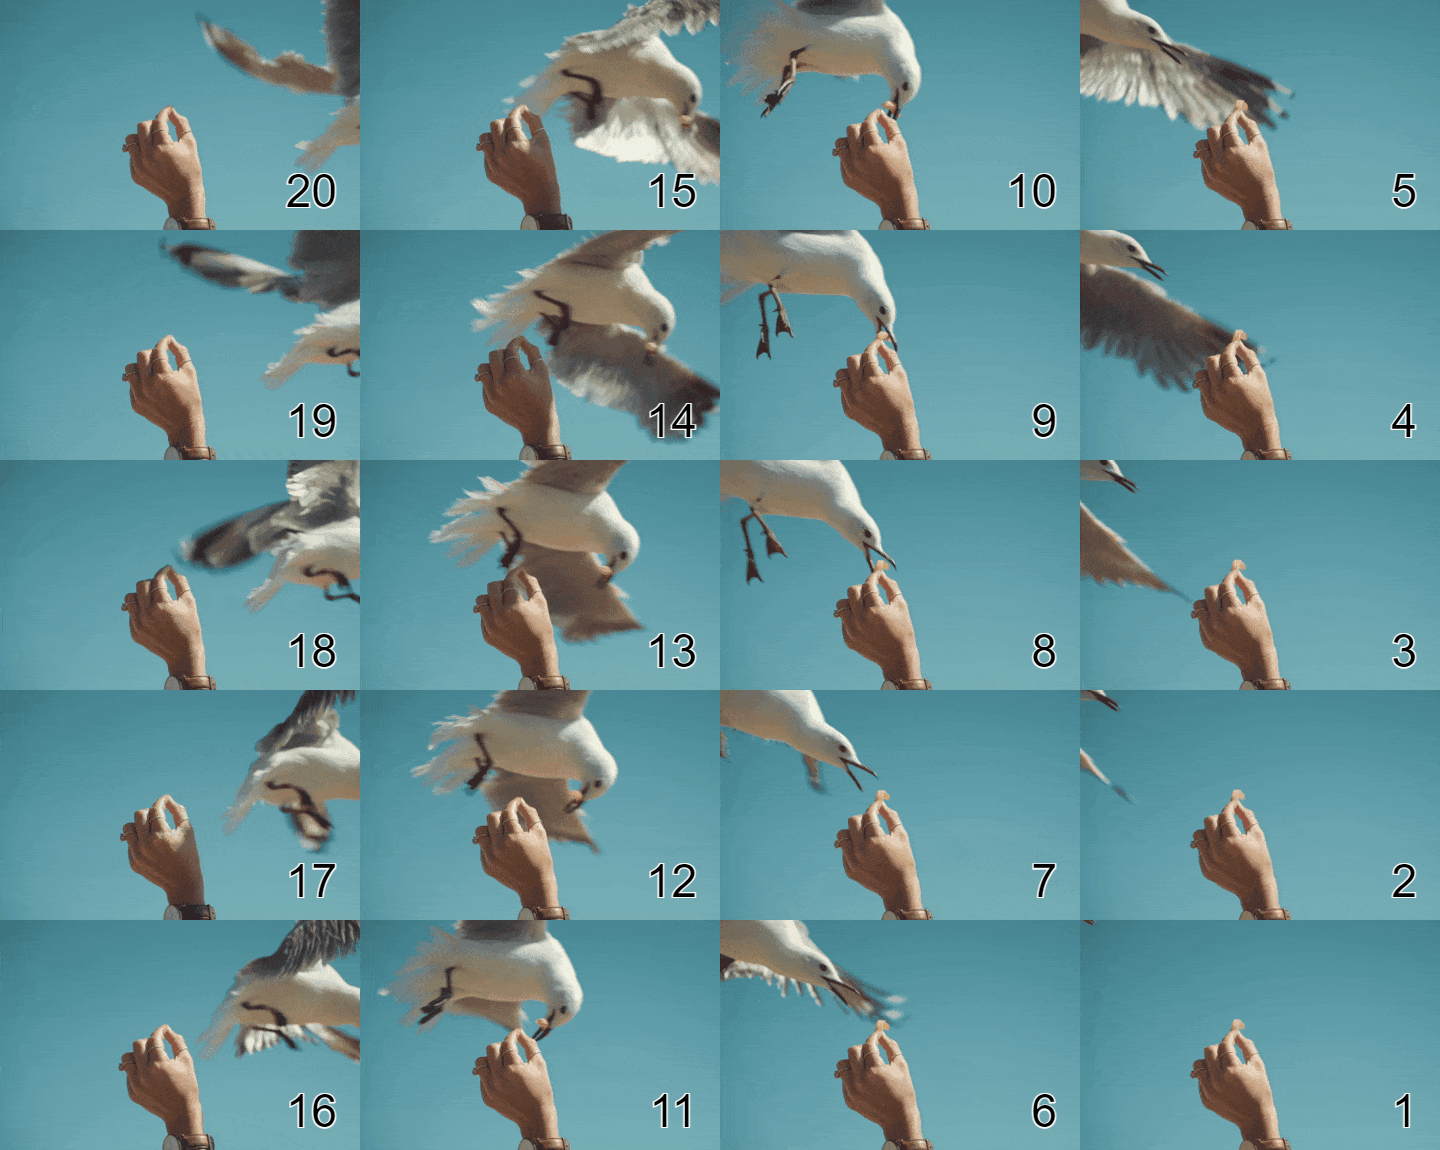 In this example, we load a GIF of a seagull snatching food from a human's hand. The animation consists of 20 frames and we print all these frames on the same static canvas. We enter the "*" character in the frame positions, which matches all GIF frames, and activate the reverse GIF frames option. The frames are placed on a rectangular grid with 5 rows and 4 columns. To better understand where each frame is placed on the grid, we've also enabled frame numbering and printed frame positions in the lower-right corner of each frame. (Source: Pexels.)